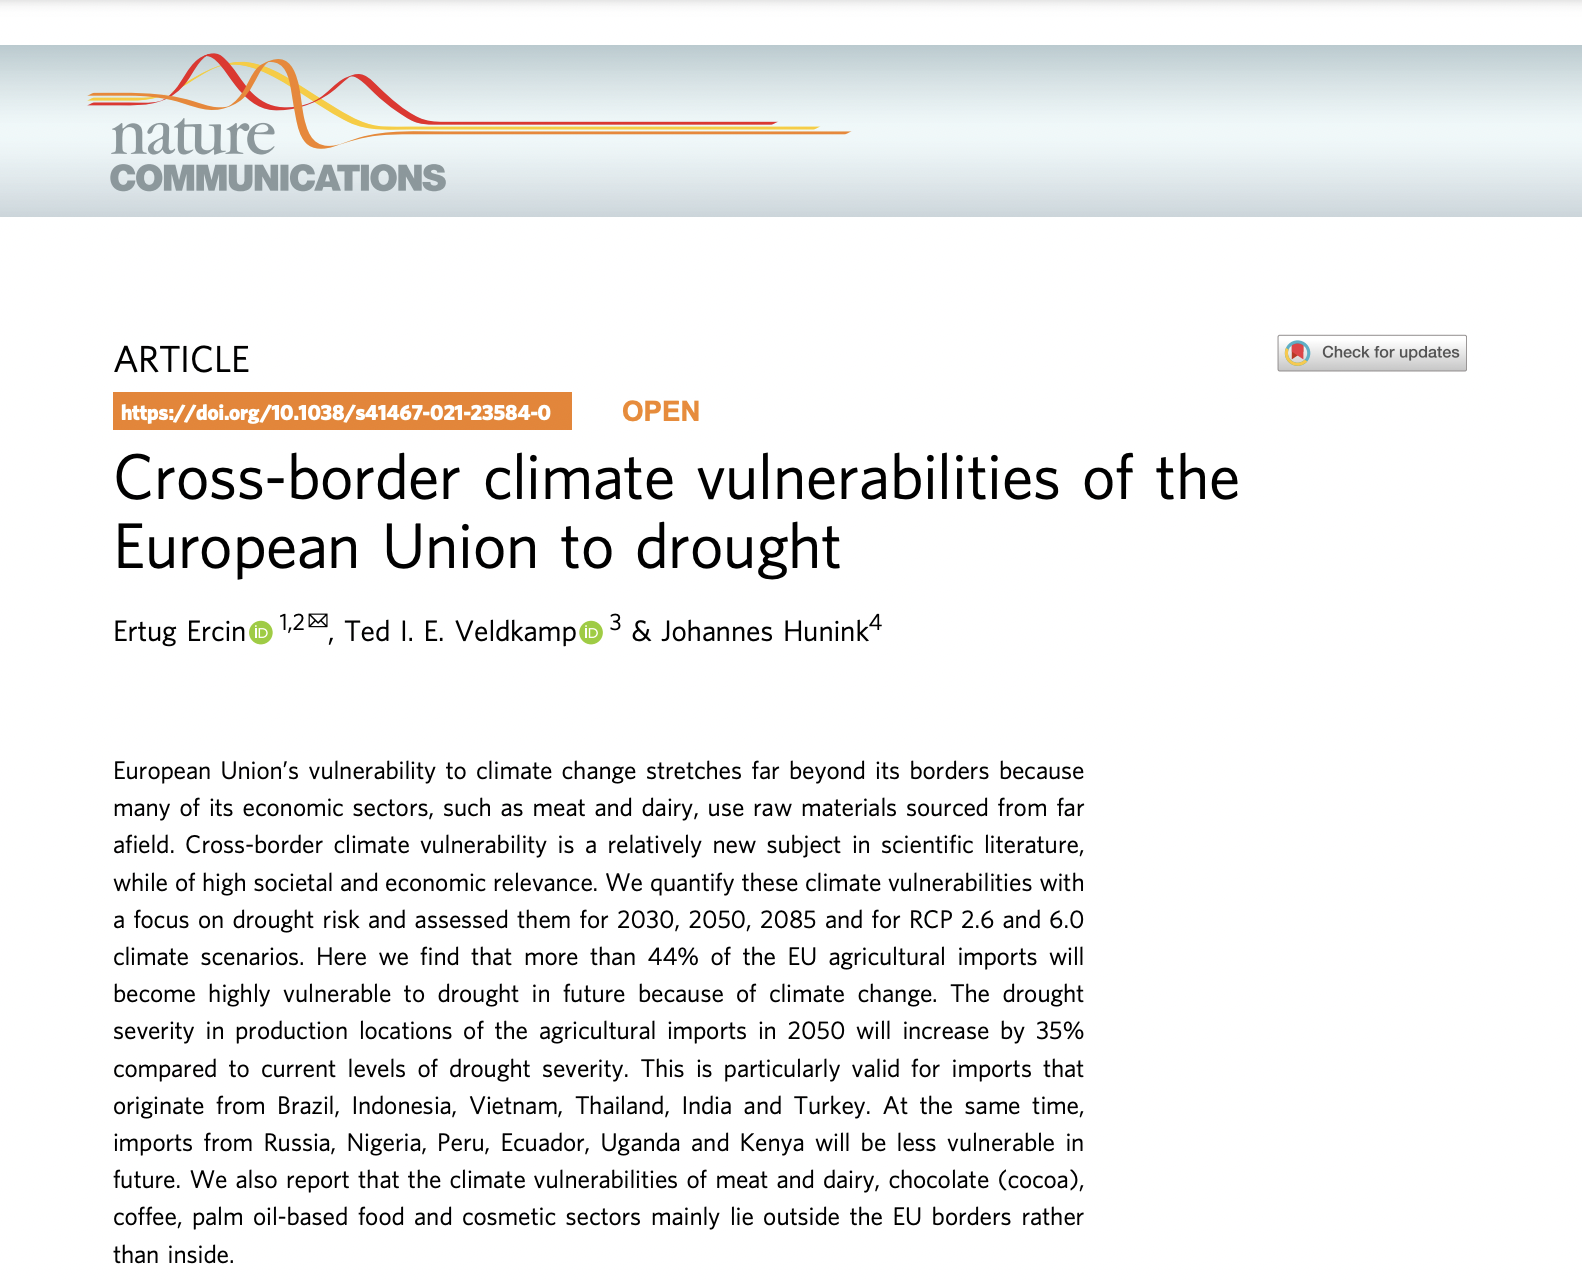 Cross-border climate vulnerabilities of the European Union to drought